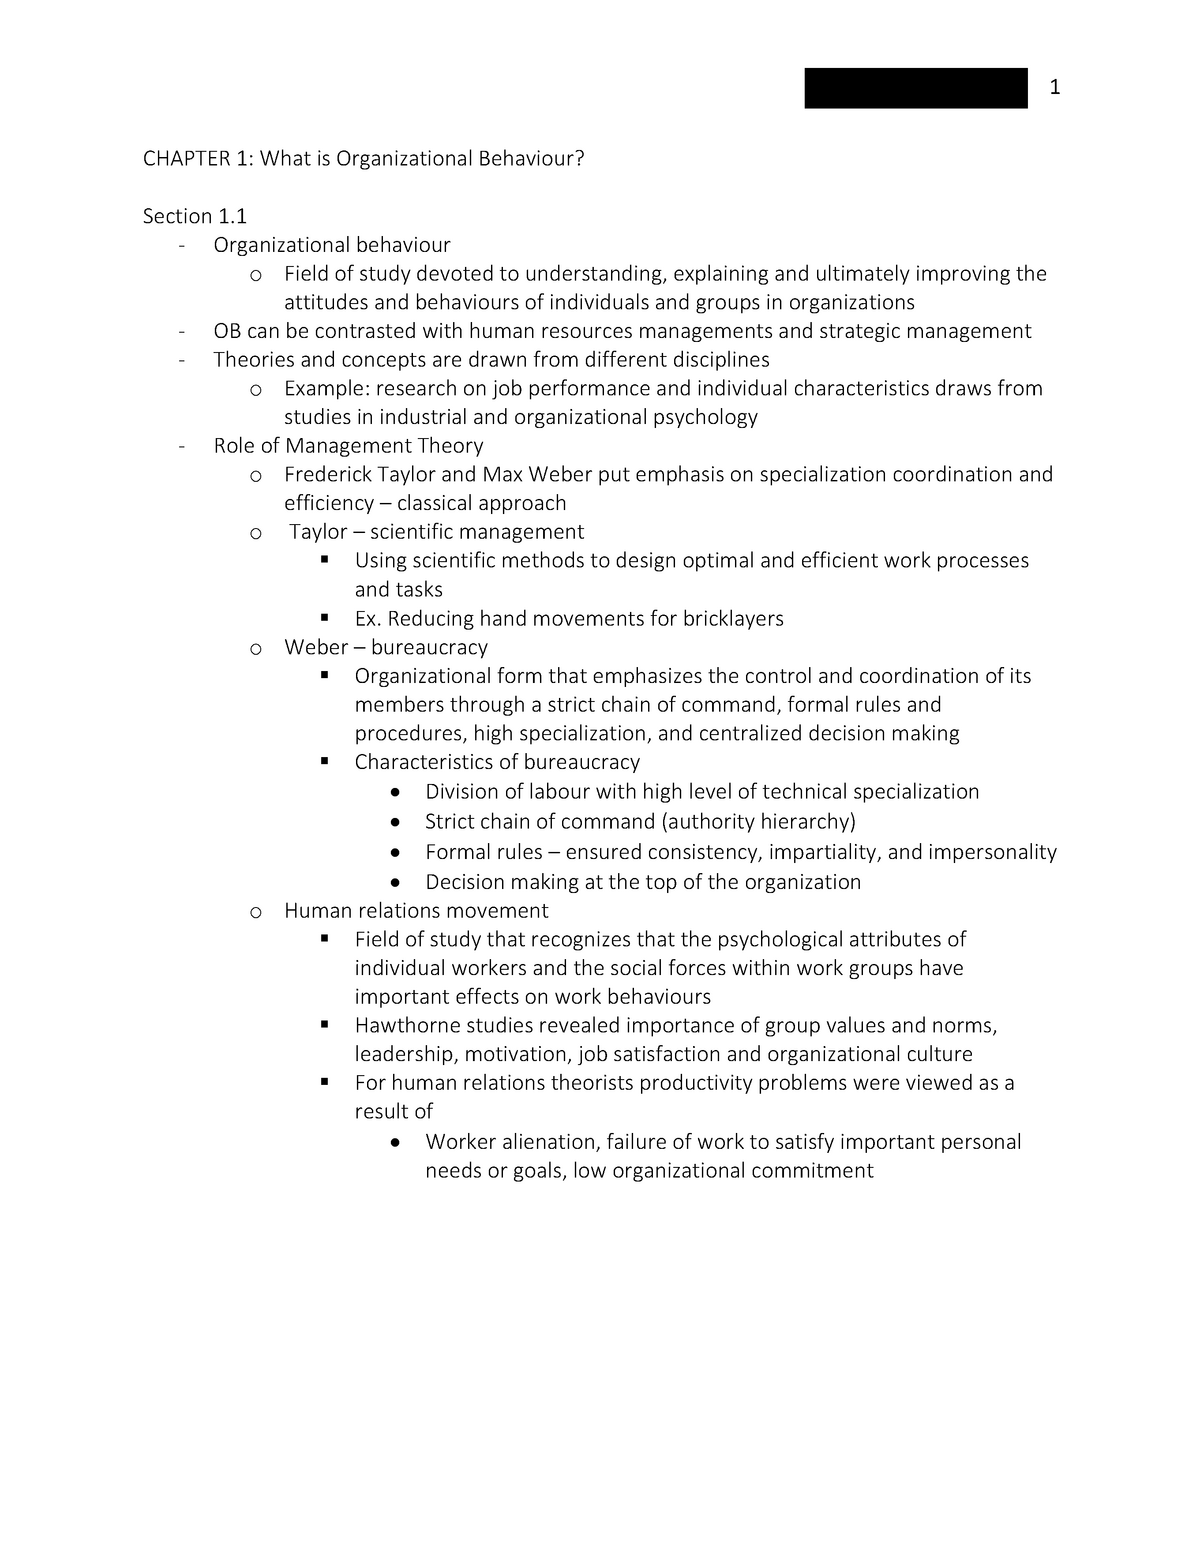 Chapter 1 And 2 Readings Lecture Notes Chapter 1 What Is Organizational Behaviour Section 1 8581